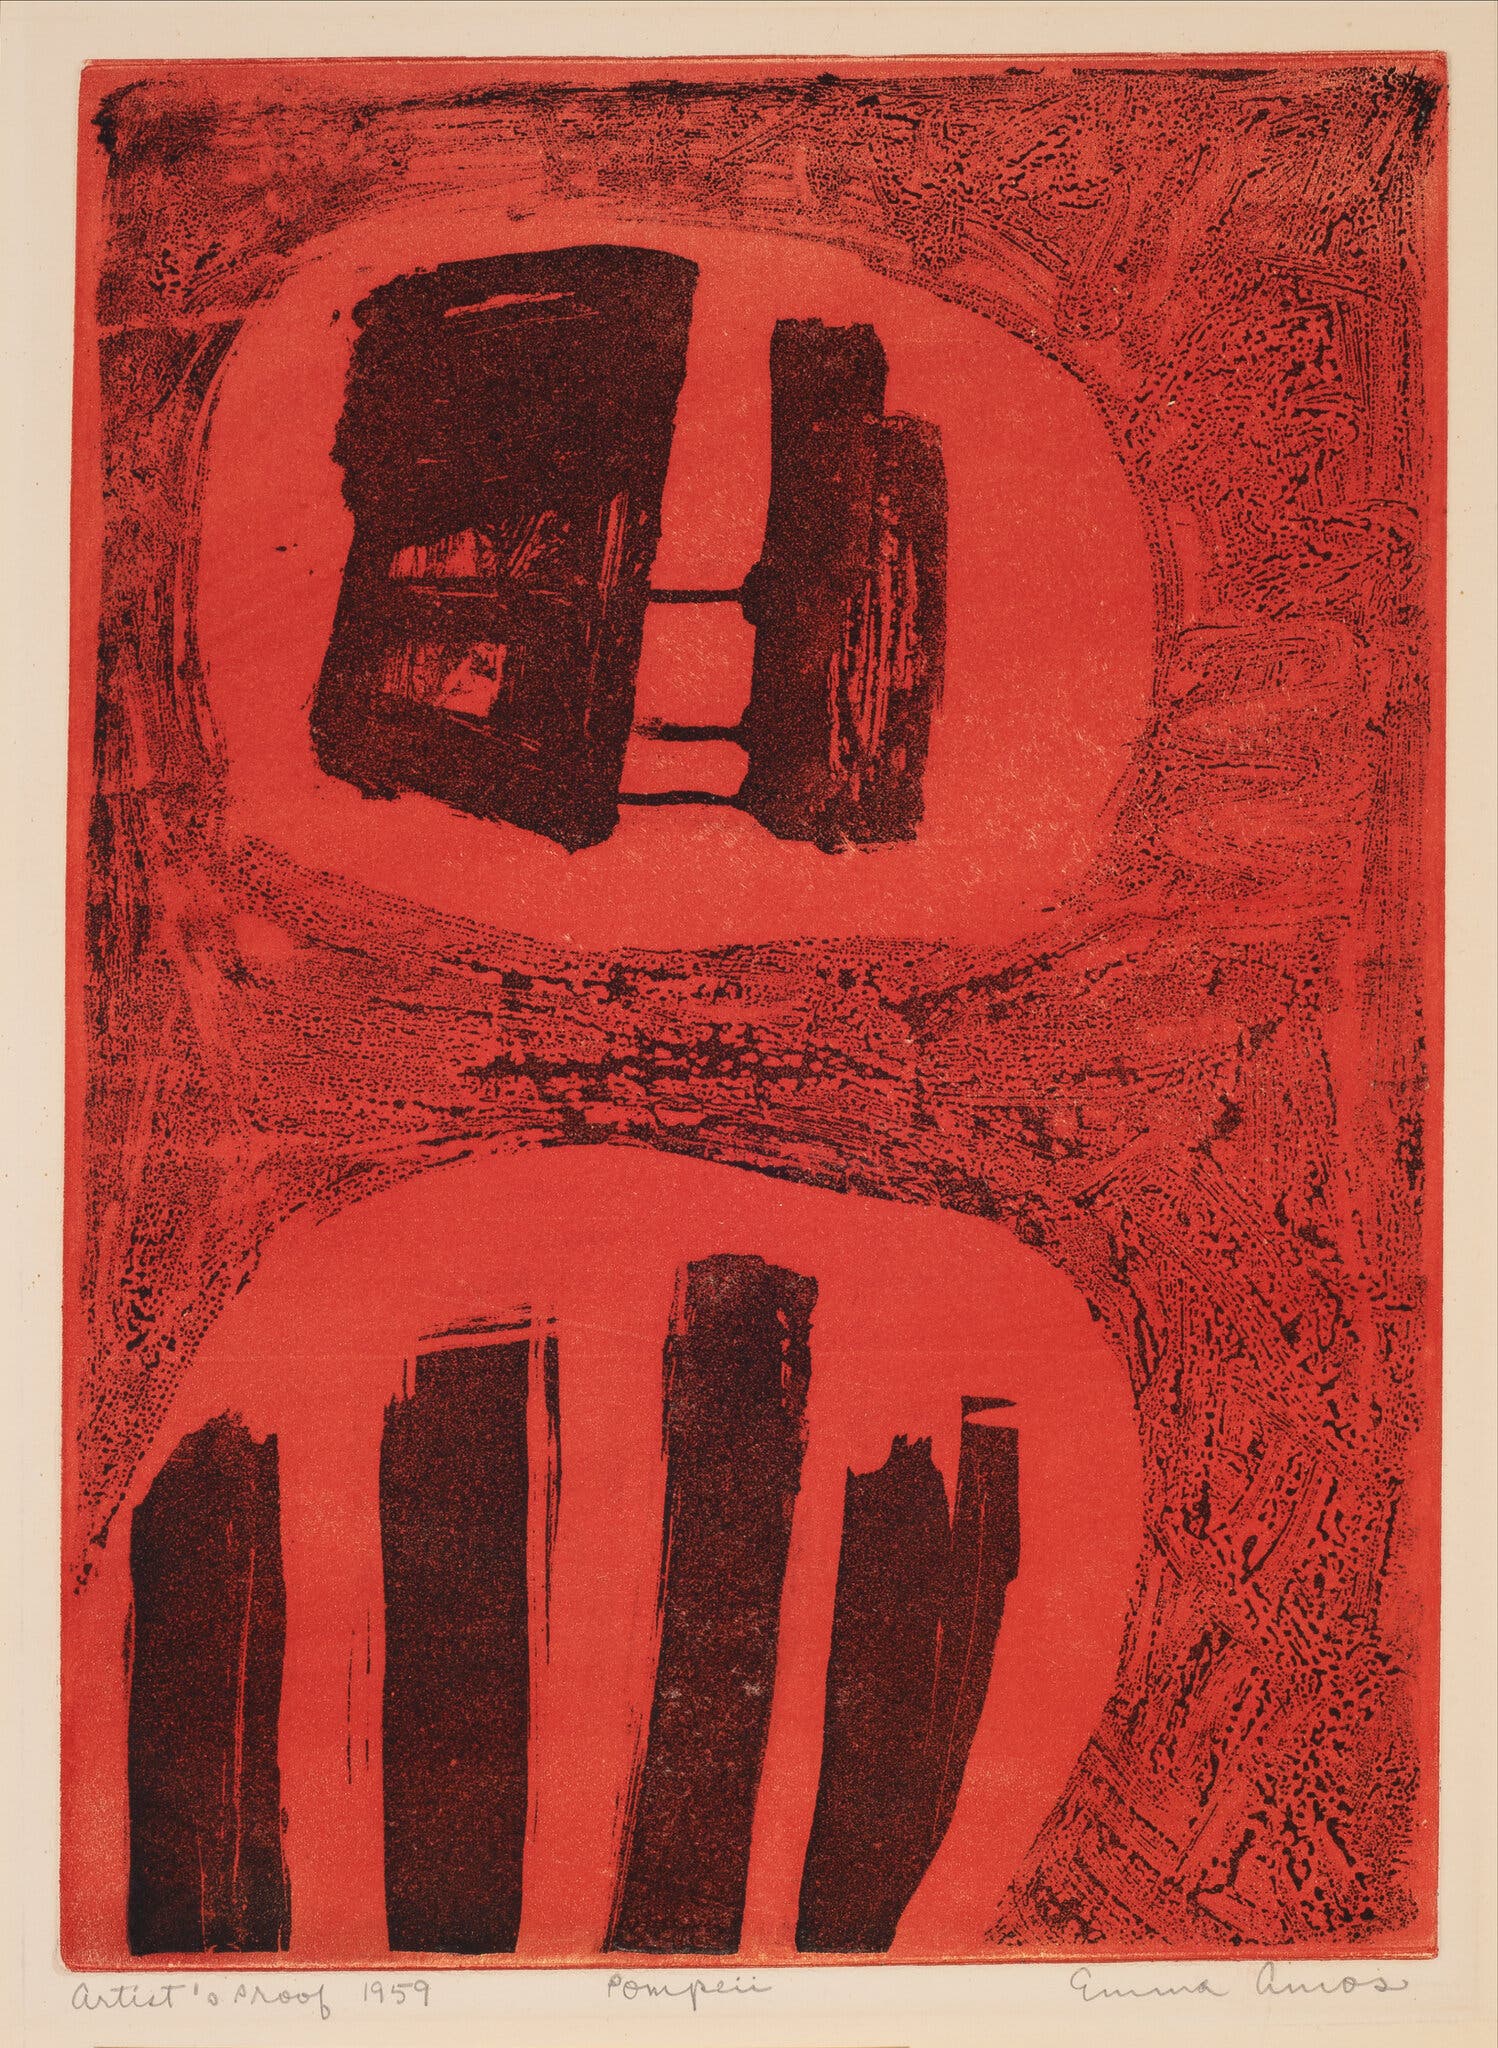 Amos’s “Pompeii (Red),” 1959, an abstract etching that anticipates her forthcoming experiments with color.